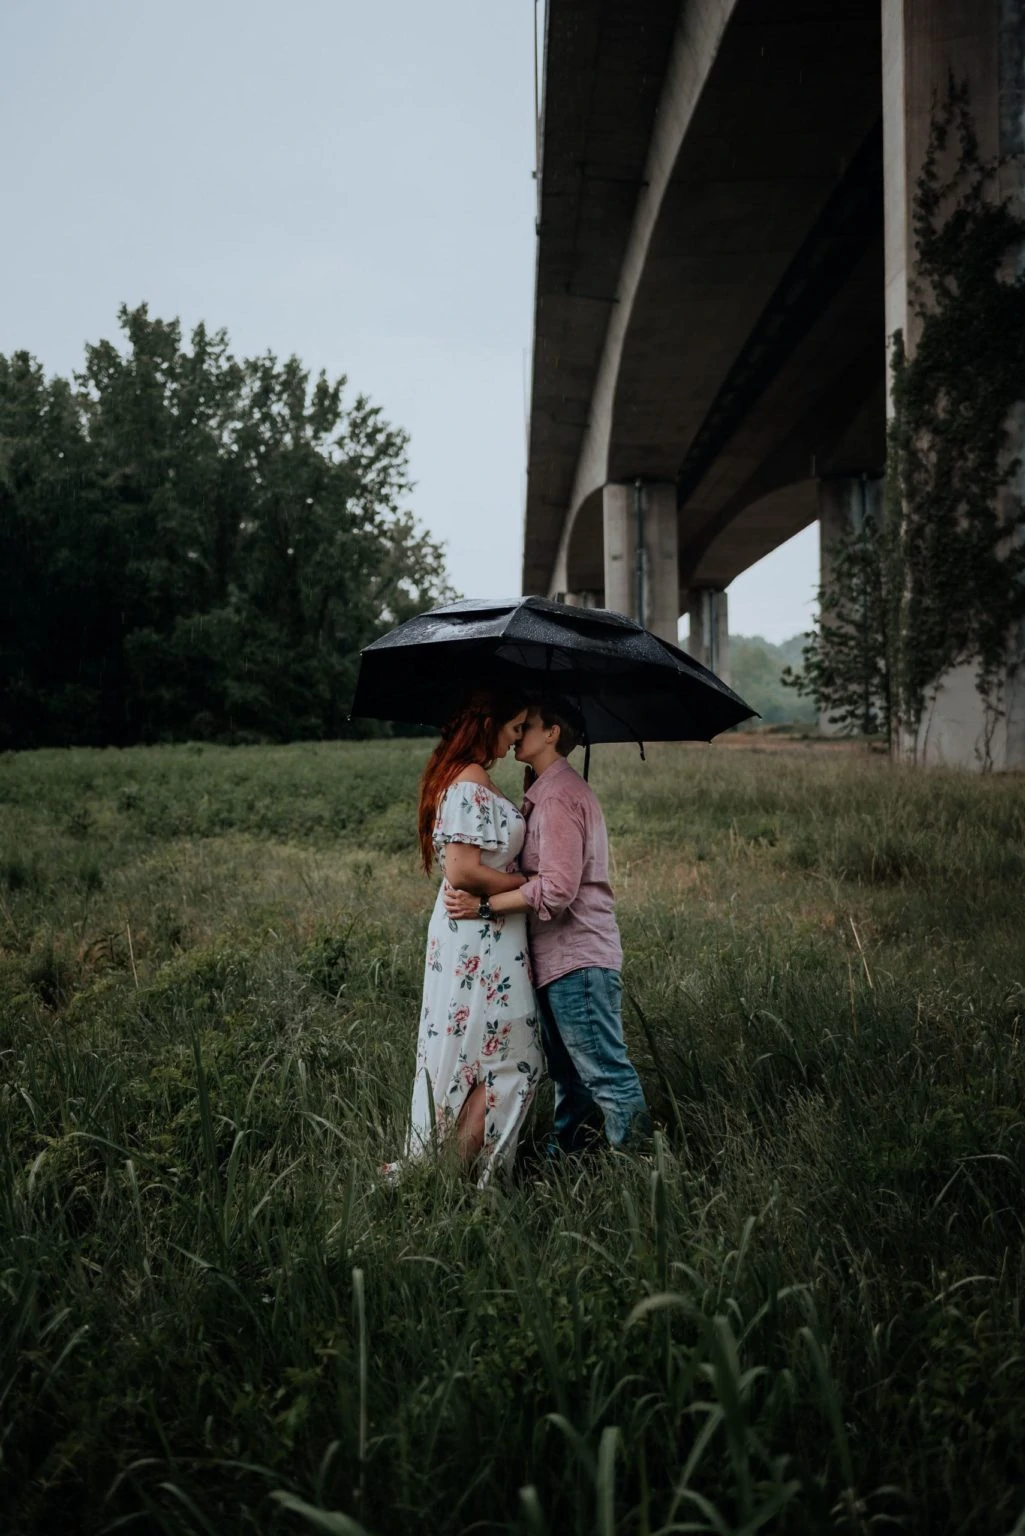 A lesbian couple kisses under a black umbrella in the middle of a field on belle isle in the middle of a rain storm.